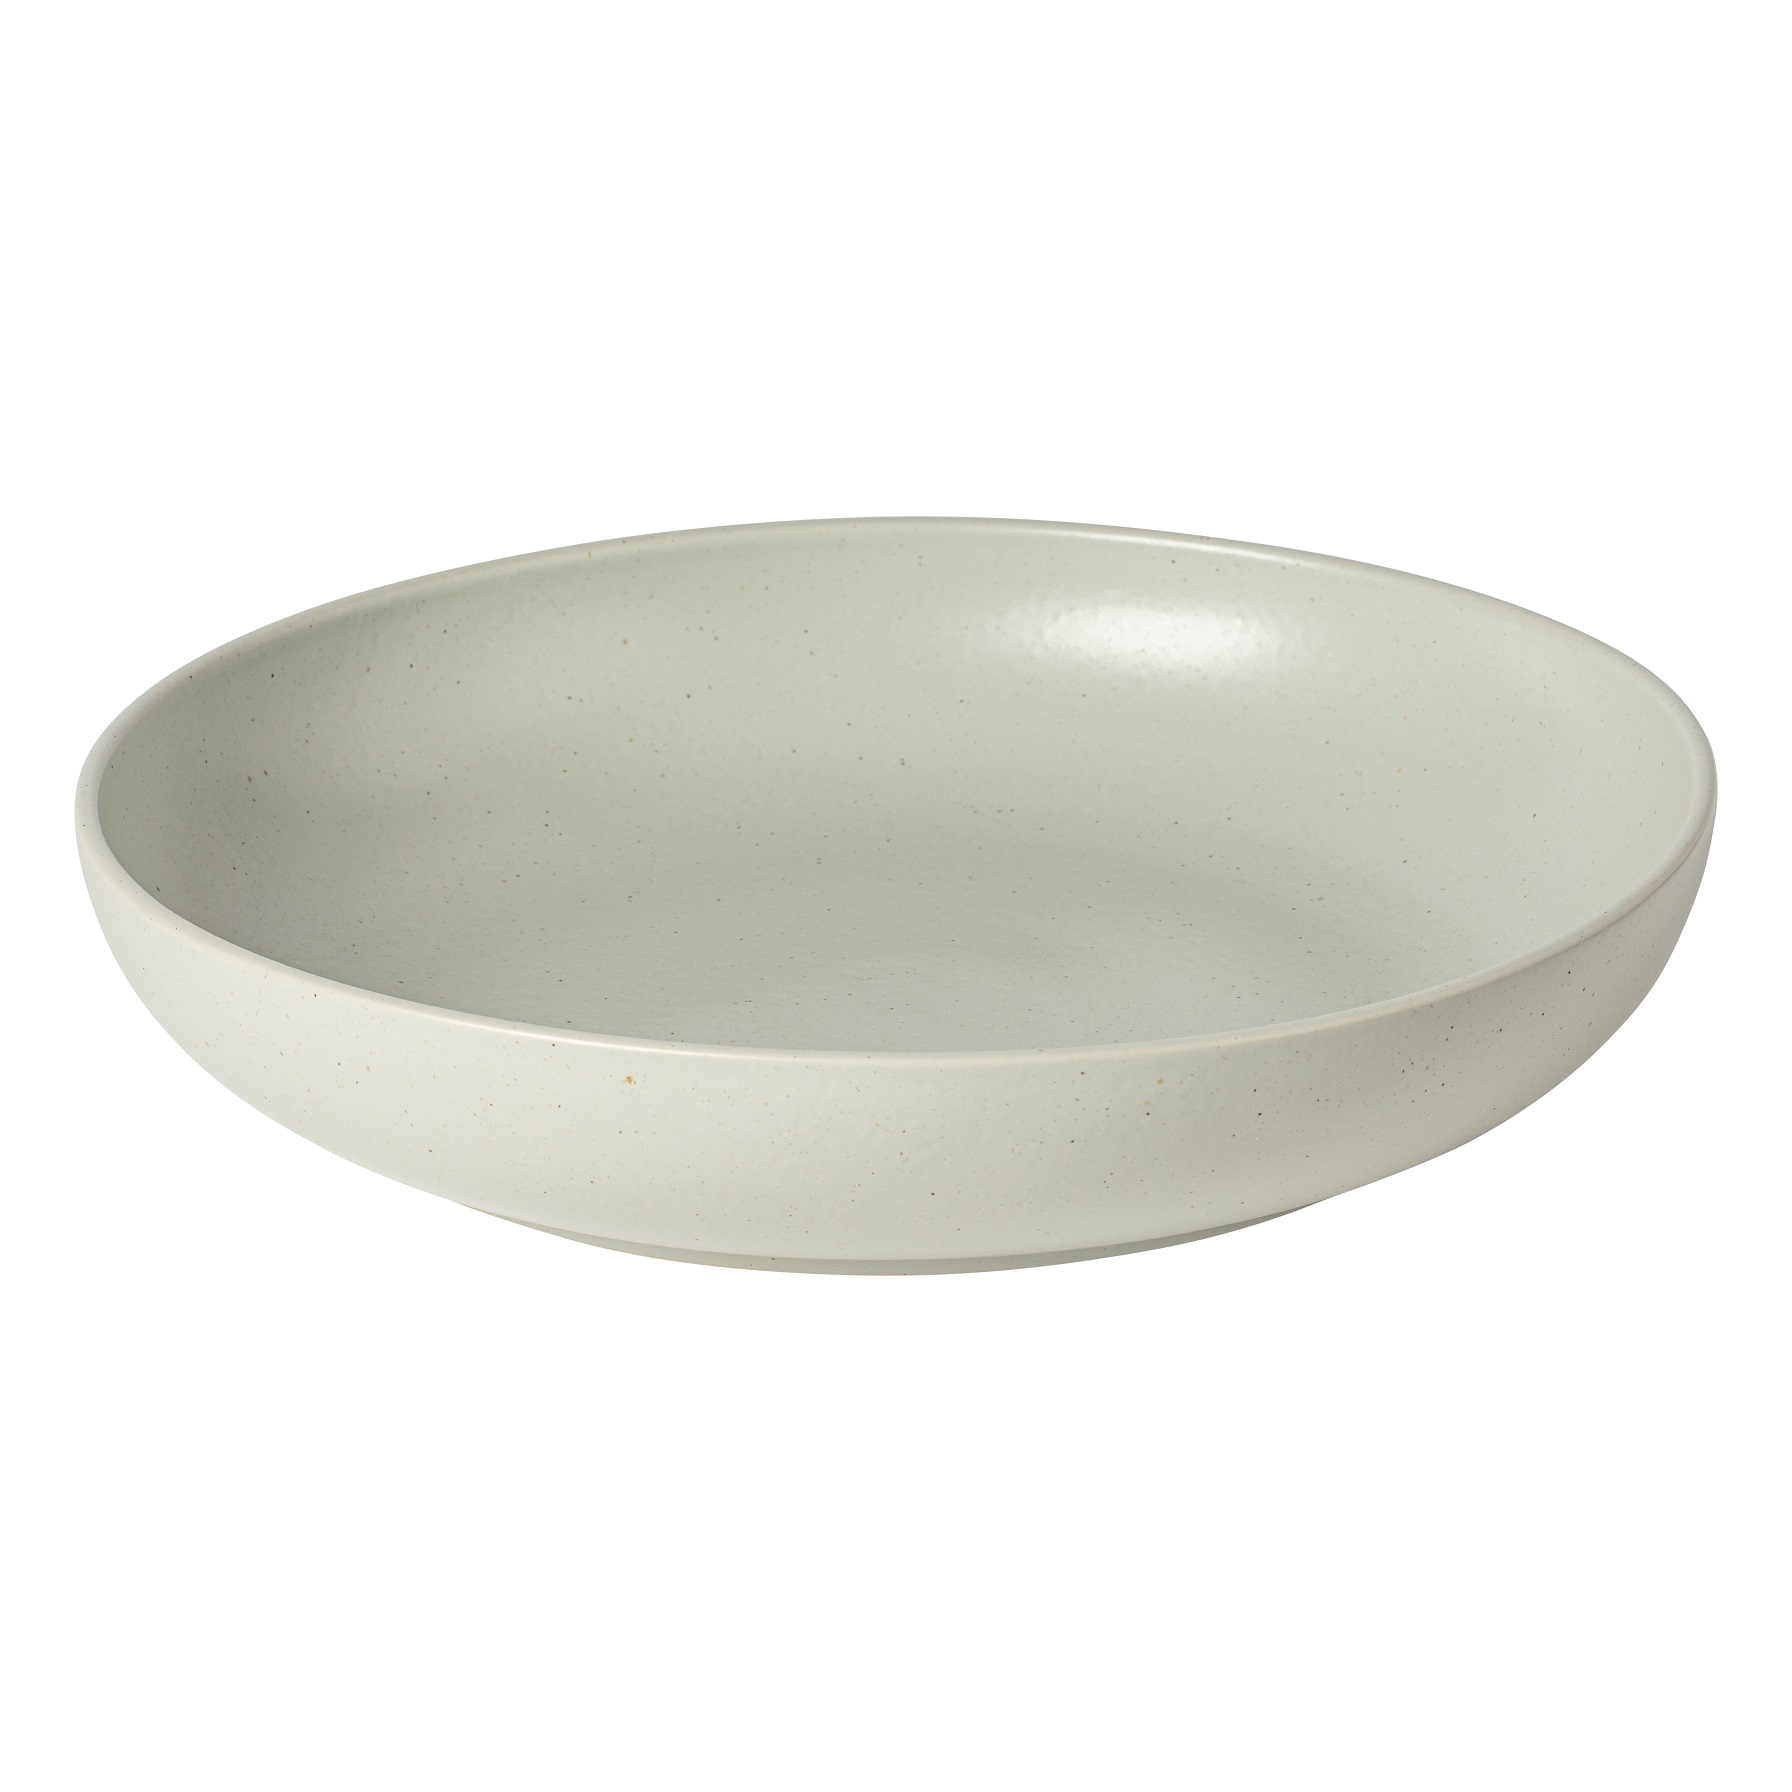 Pacifica Oyster Grey Serving Bowl 32cm Gift